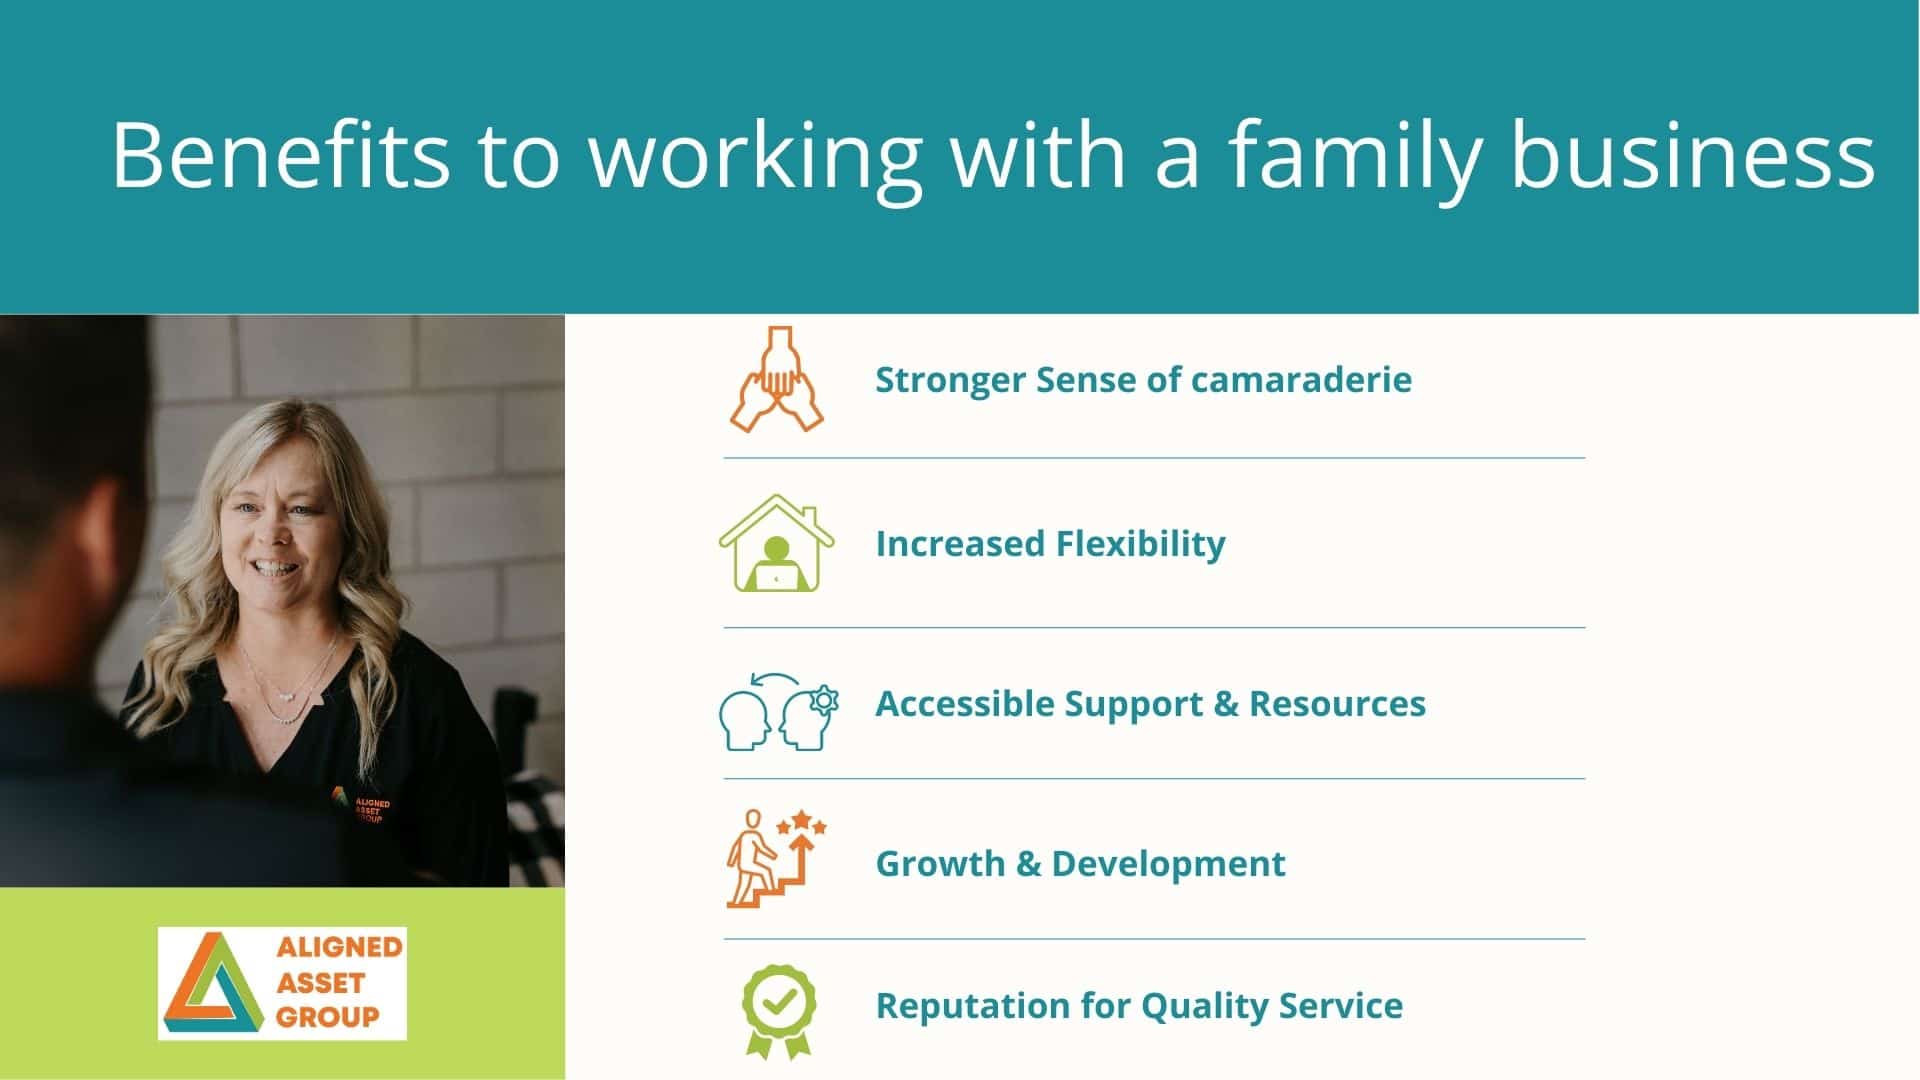 List of 5 benefits to working for a family business